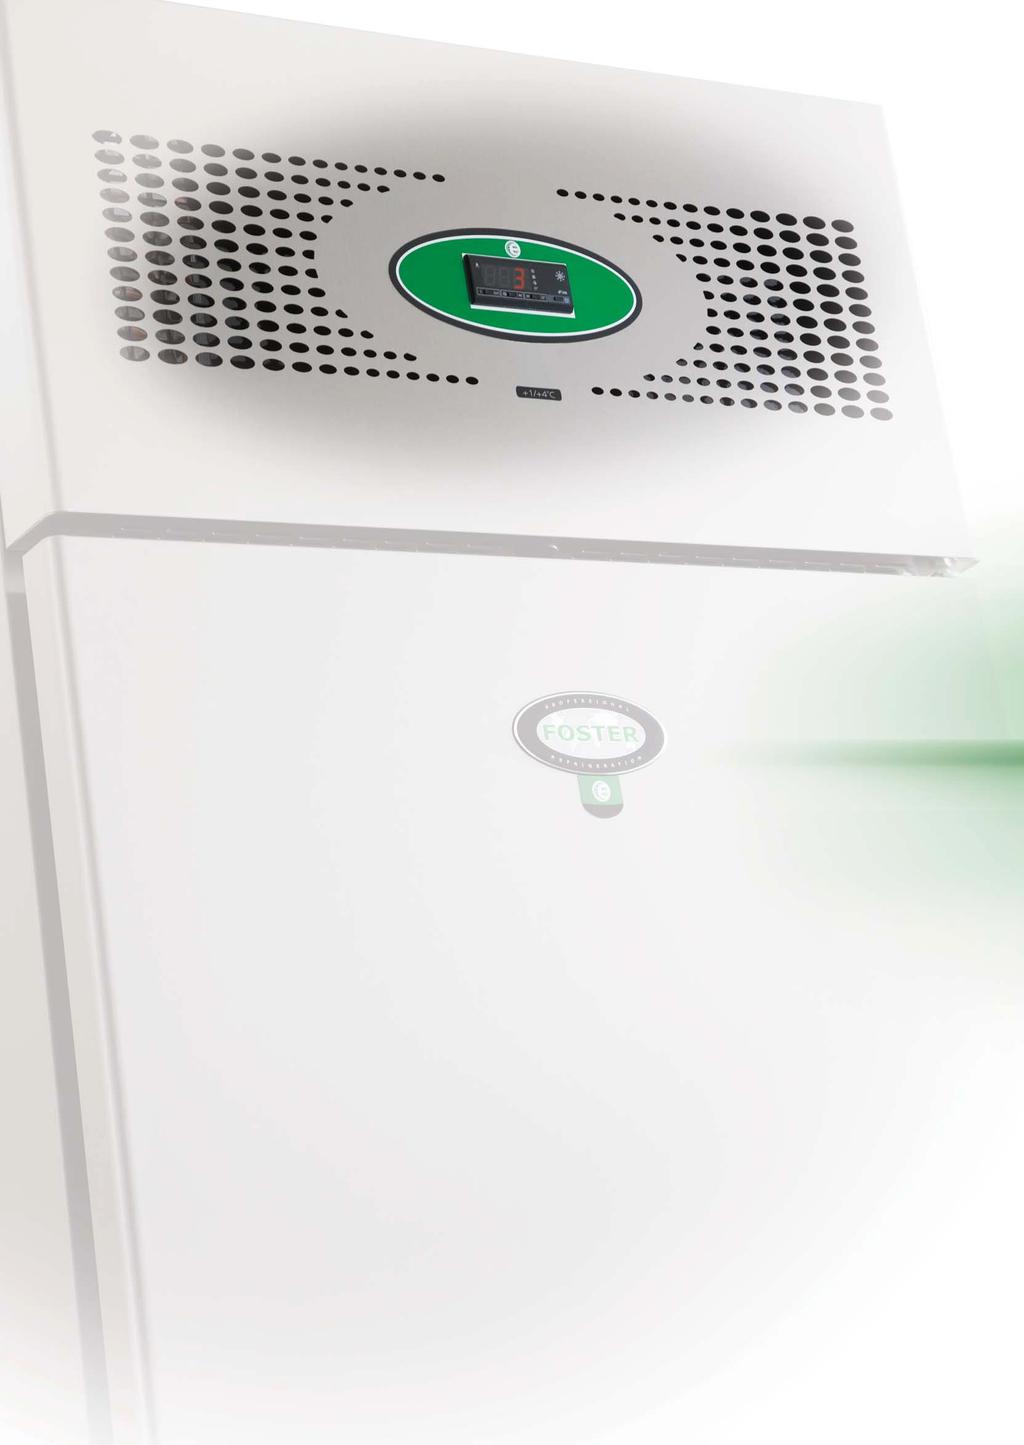 GASTRO ECOPRO the Greenest Foodsafe Refrigeration in the World Foster Refrigerator has just launched its Eco range of